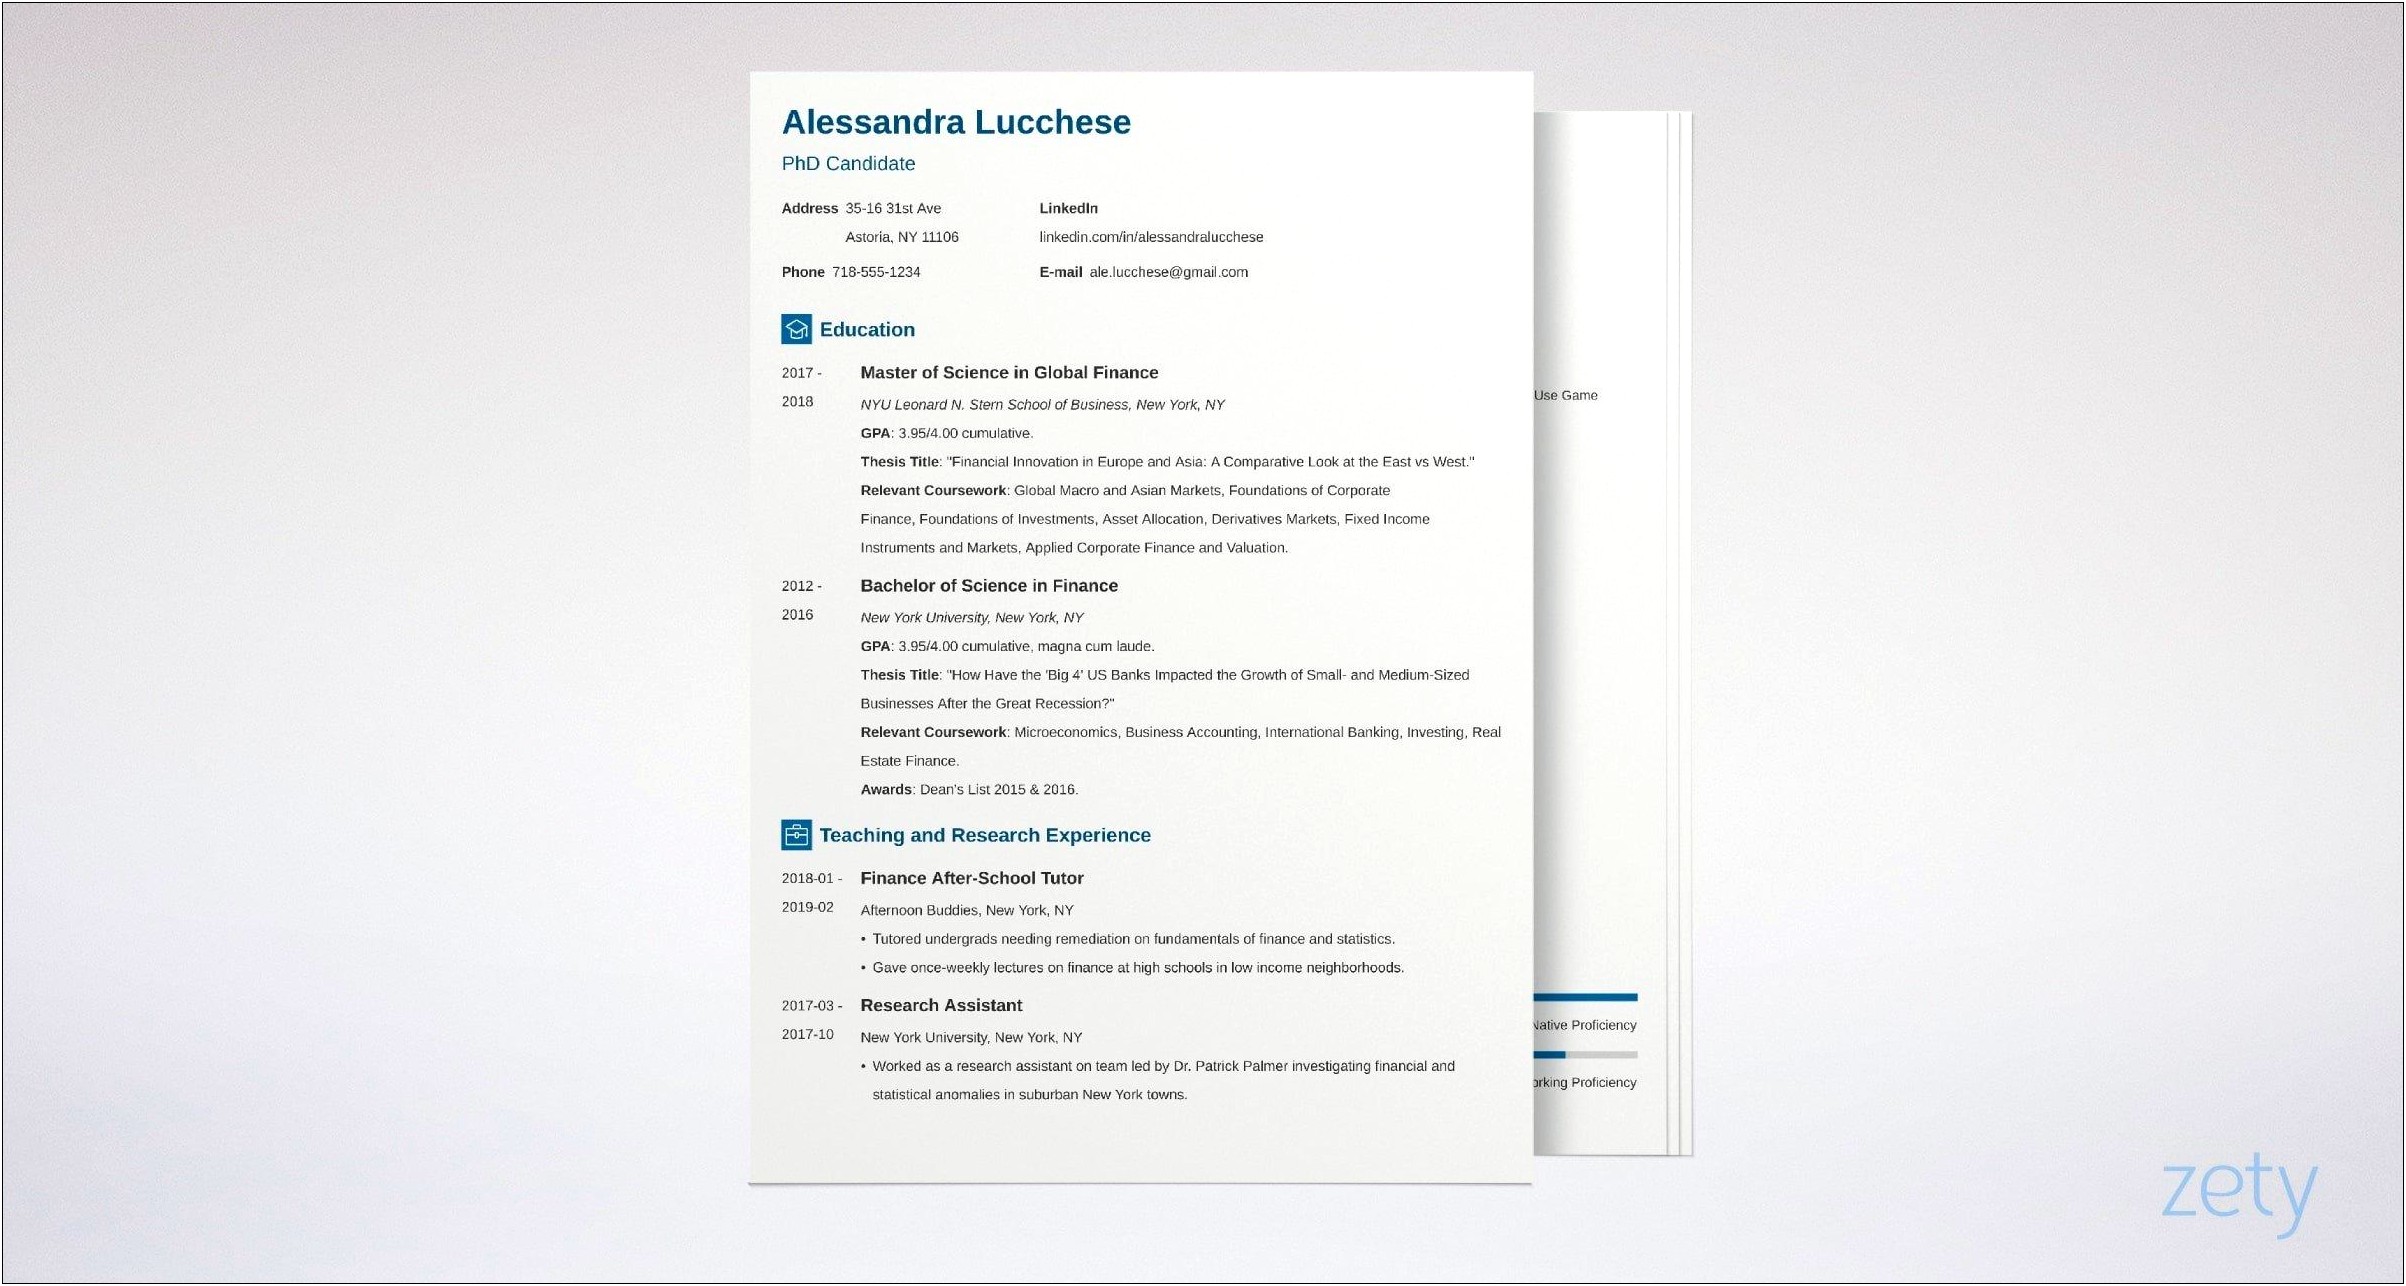 Examples Of Resumes While Still In Grad School